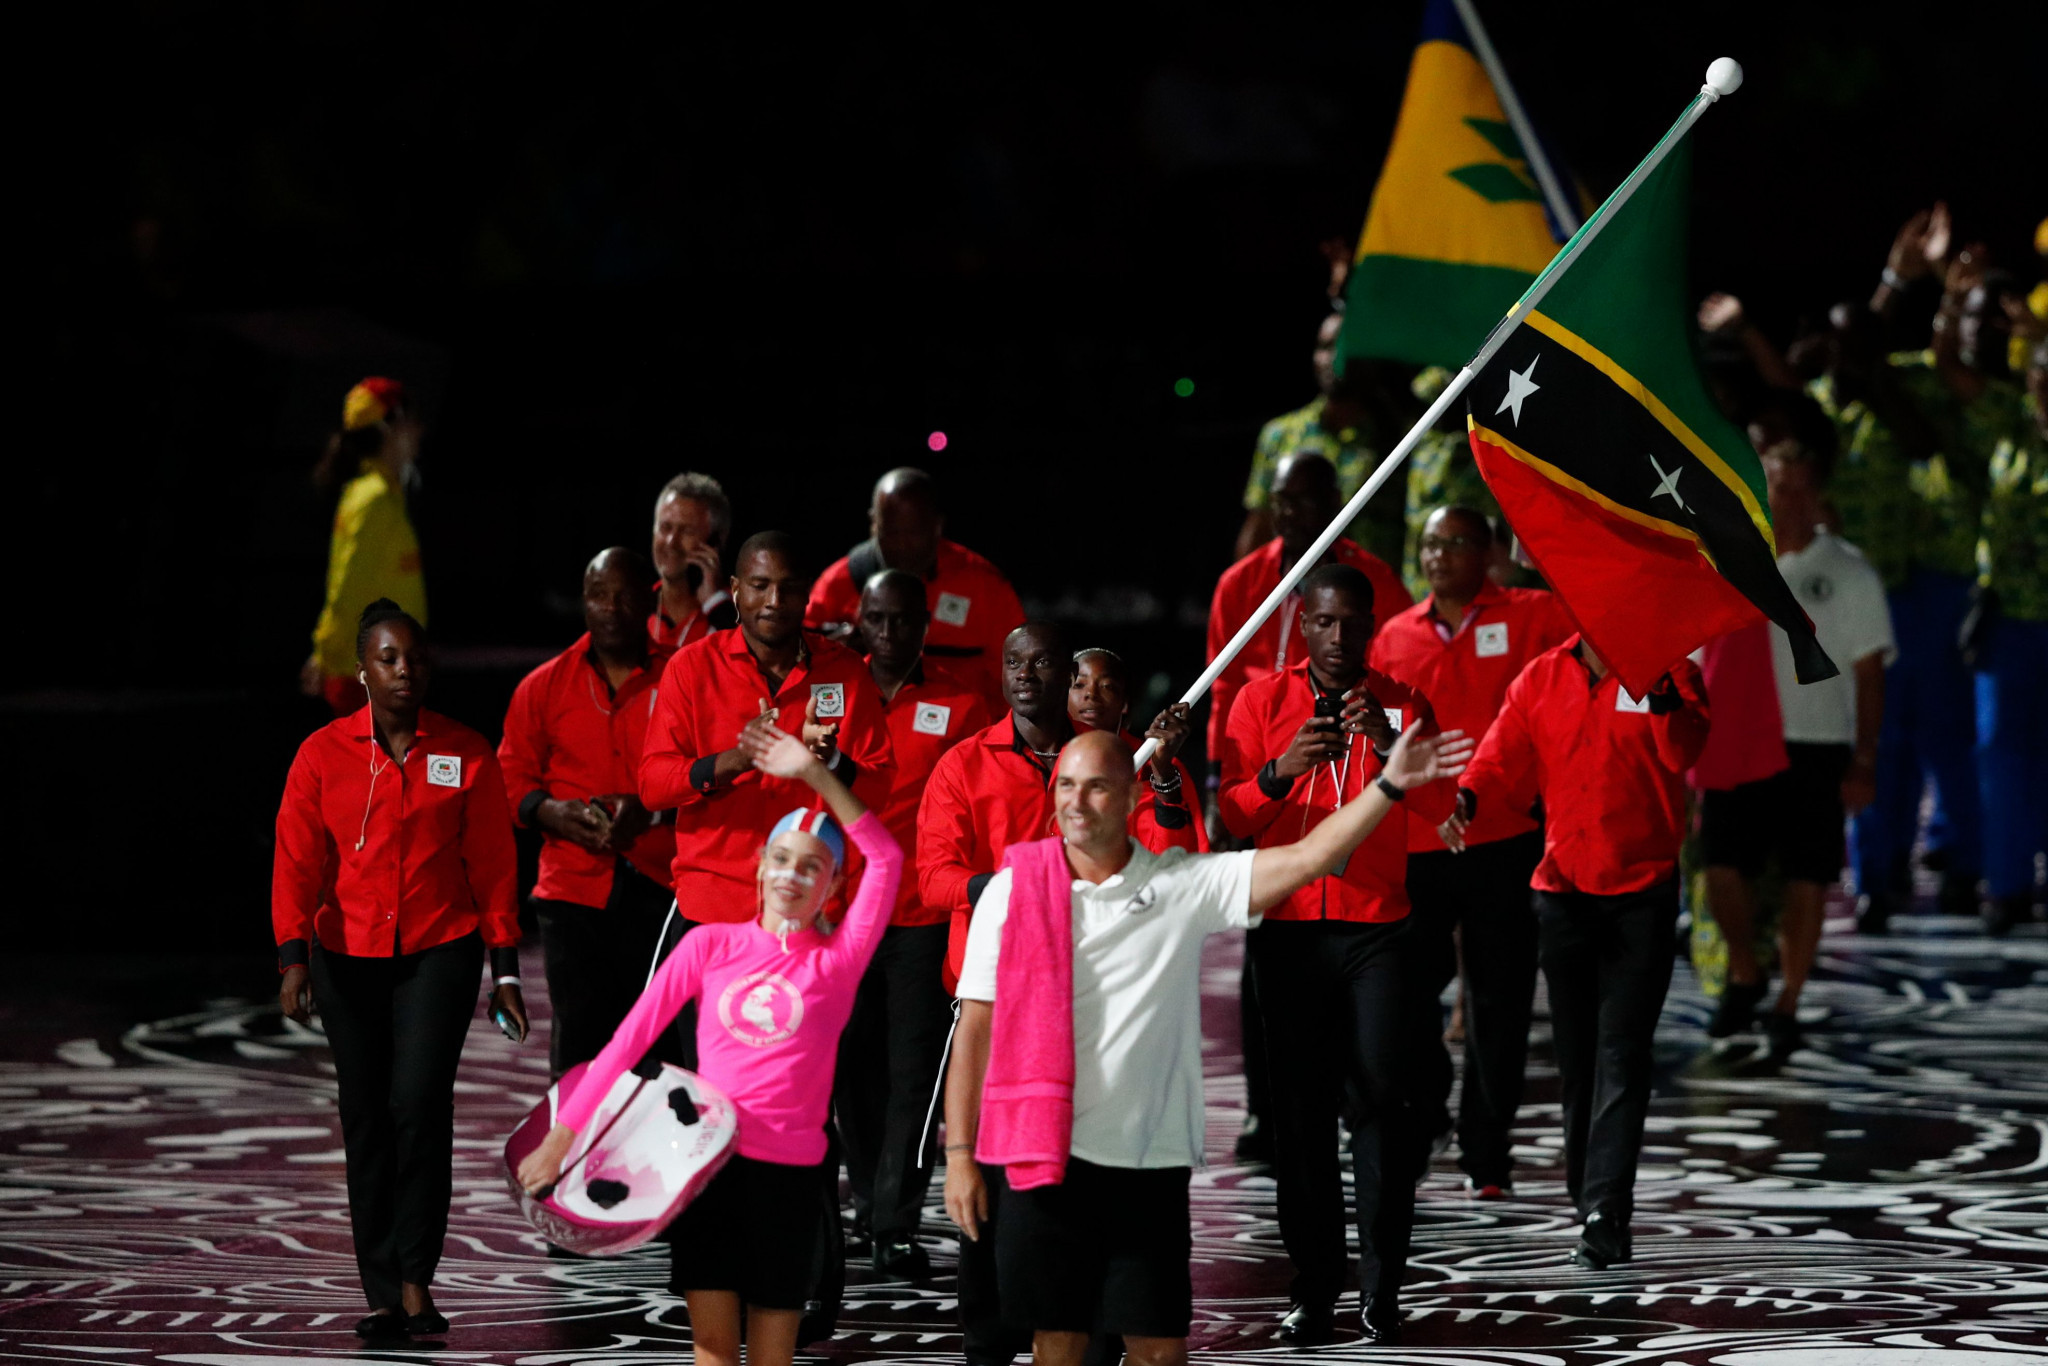 Saint Kitts and Nevis established its National Olympic Committee in 1986 ©Getty Images